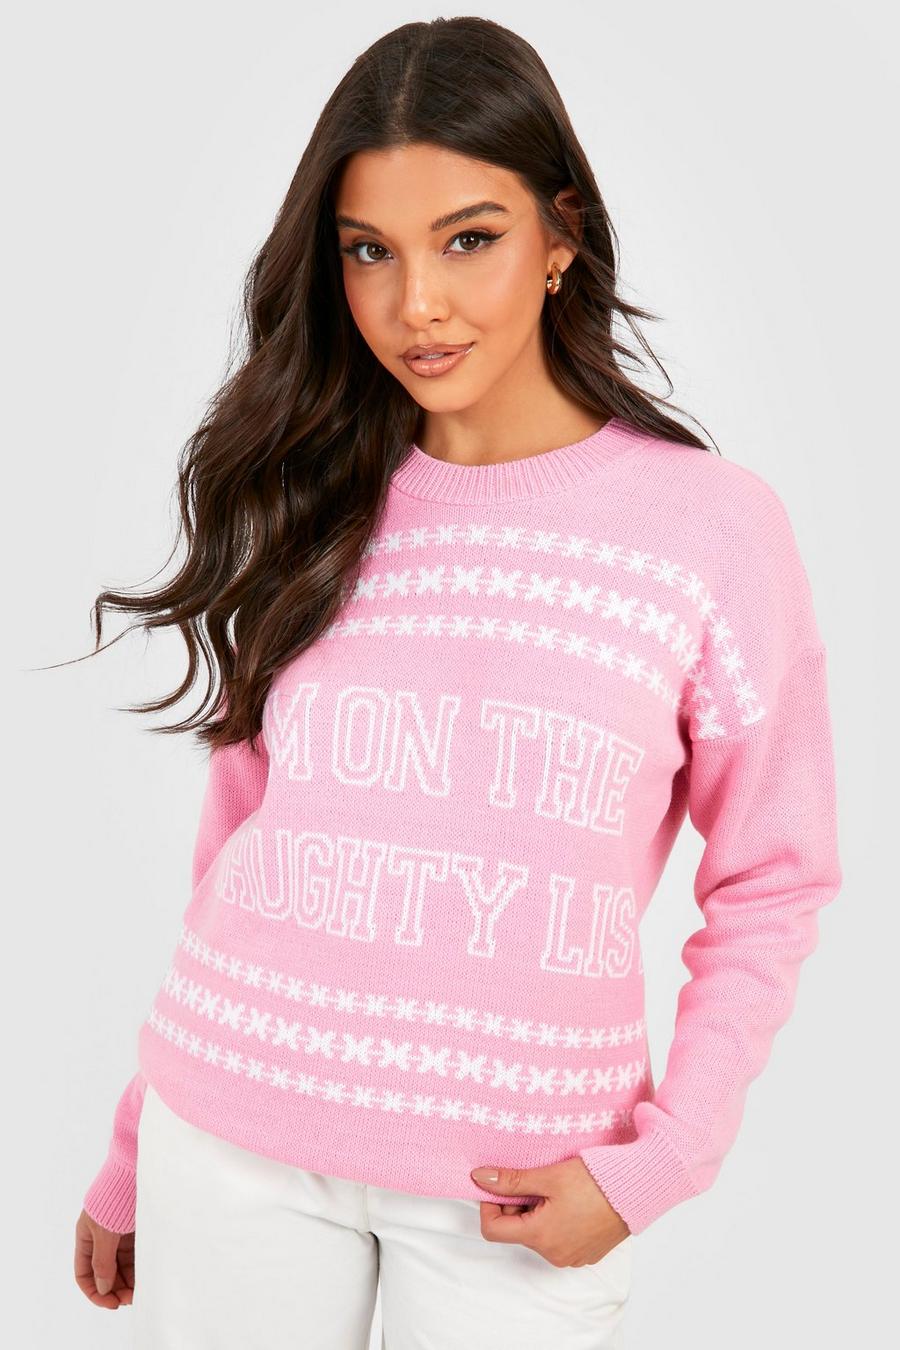 Maglione di Natale con slogan Naughty List, Baby pink image number 1